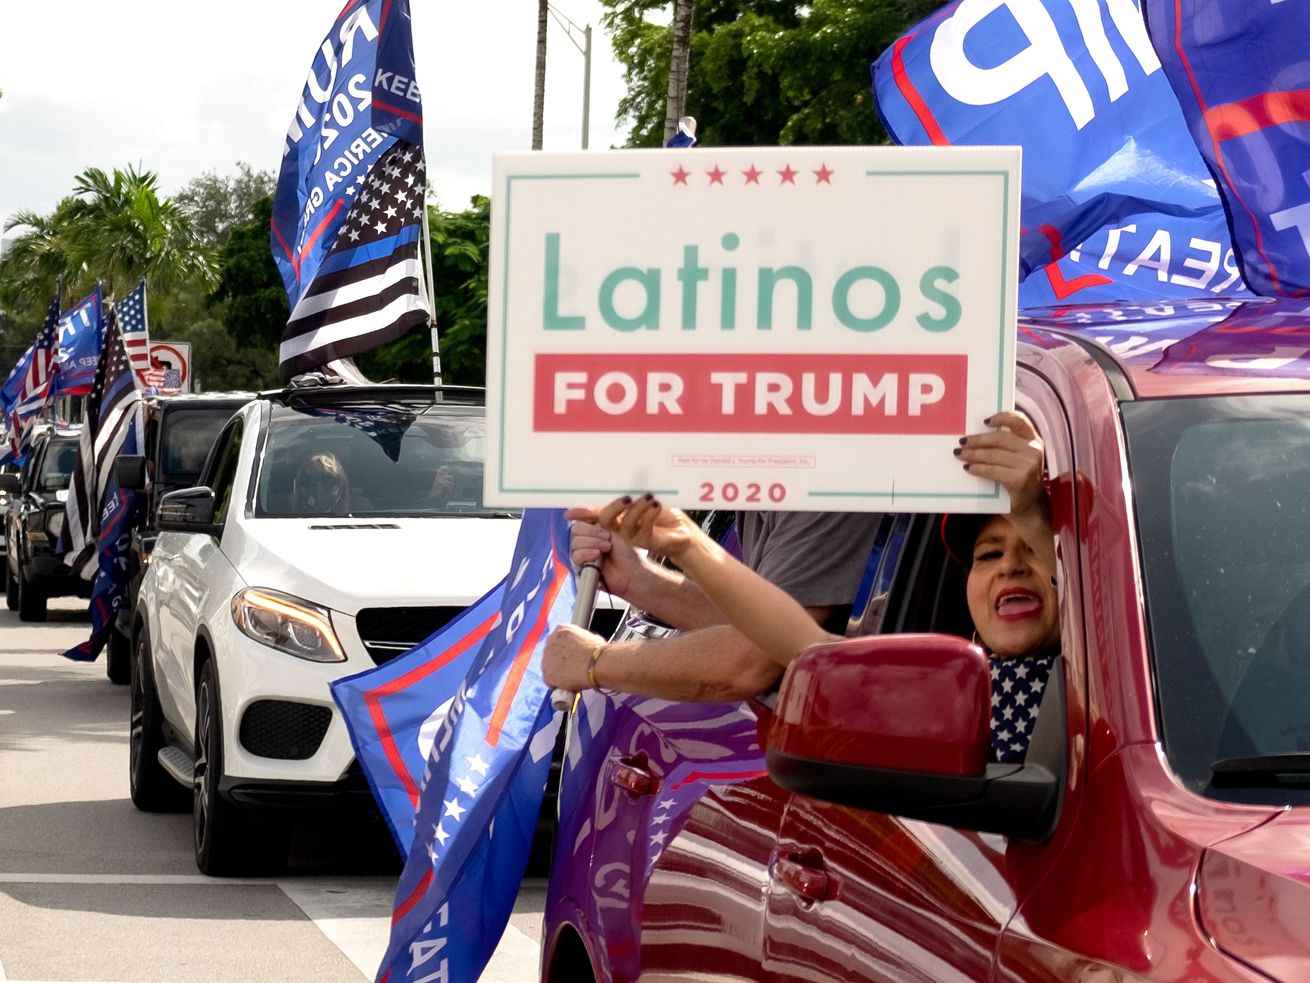 New data helps explain Trump’s gains among Latino voters in 2020